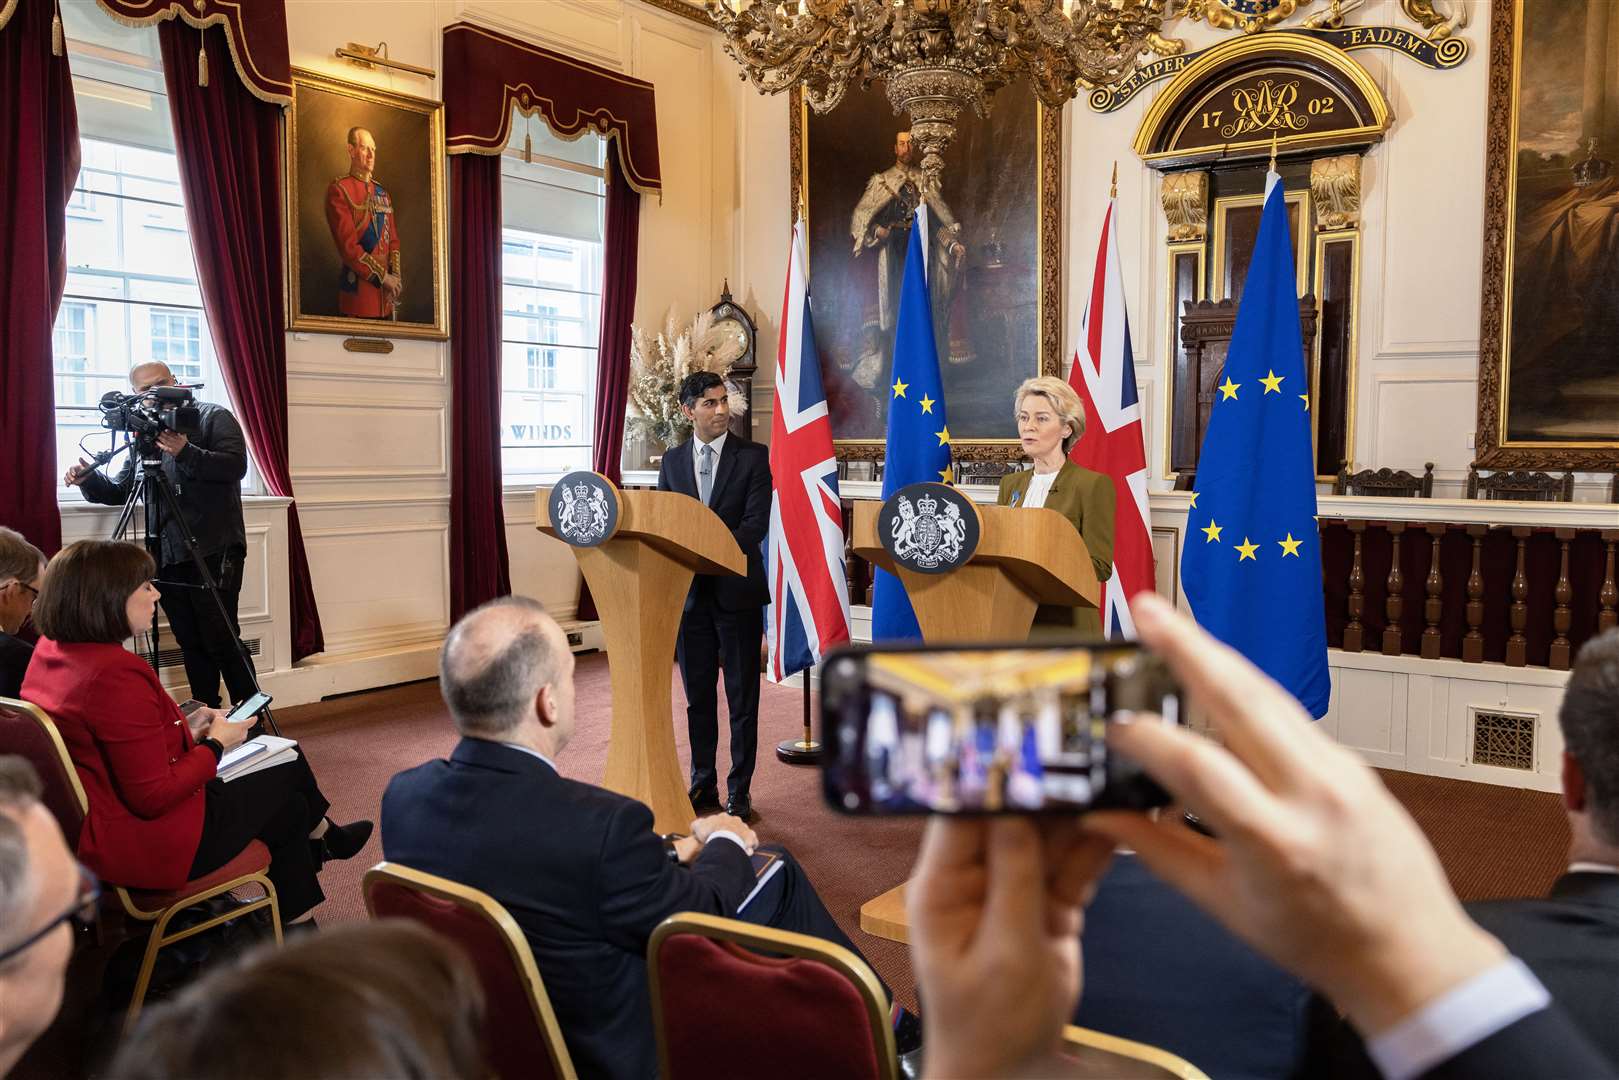 Prime Minister Rishi Sunak and European Commission president Ursula von der Leyen during a press conference at the Guildhall in Windsor, Berkshire last month following the announcement that they have struck a deal over the Northern Ireland Protocol (Dan Kitwood/PA)